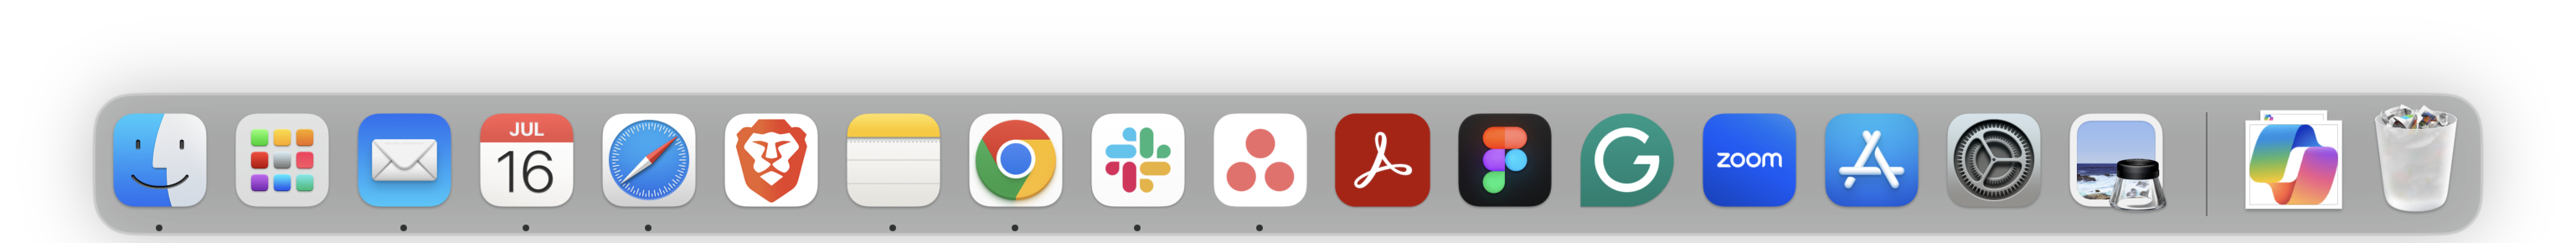 Mac dock showing icons for various applications including Finder, Mail, Calendar, Safari, Chrome, Slack, Zoom, and App Store.